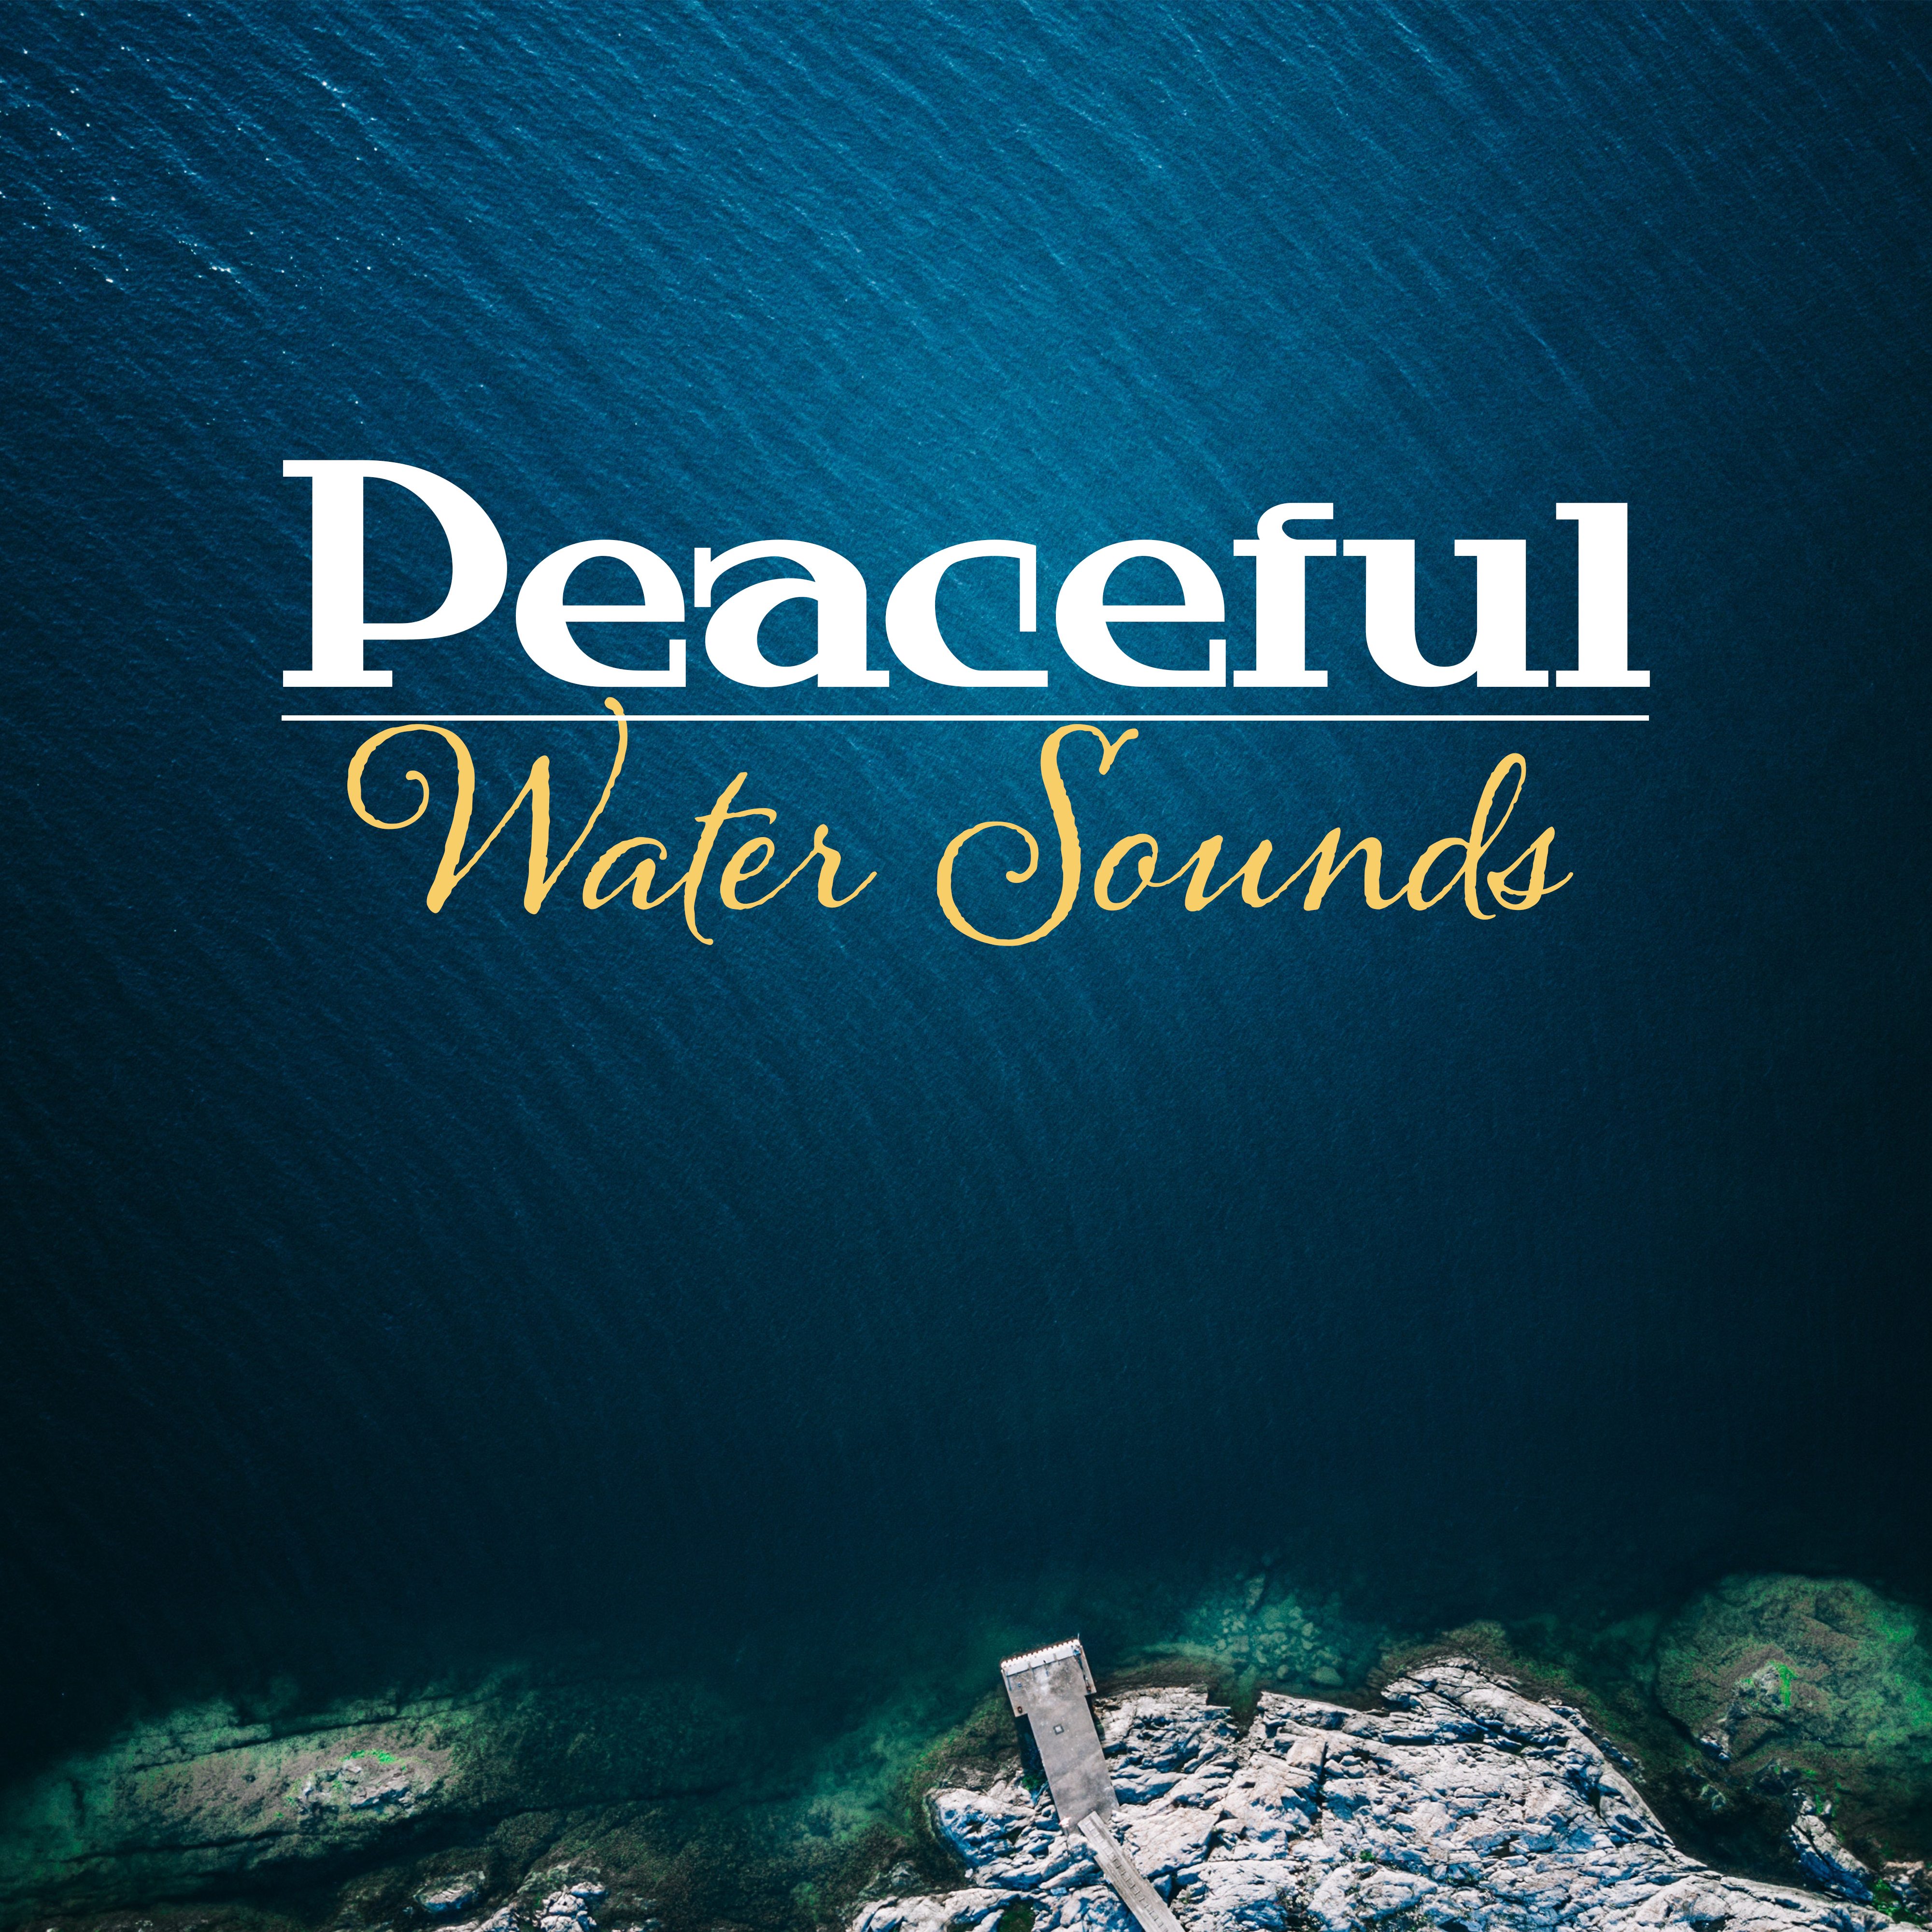 Peaceful Water Sounds – Healing Water, Sounds to Relax, Rest a Bit, Stress Relief